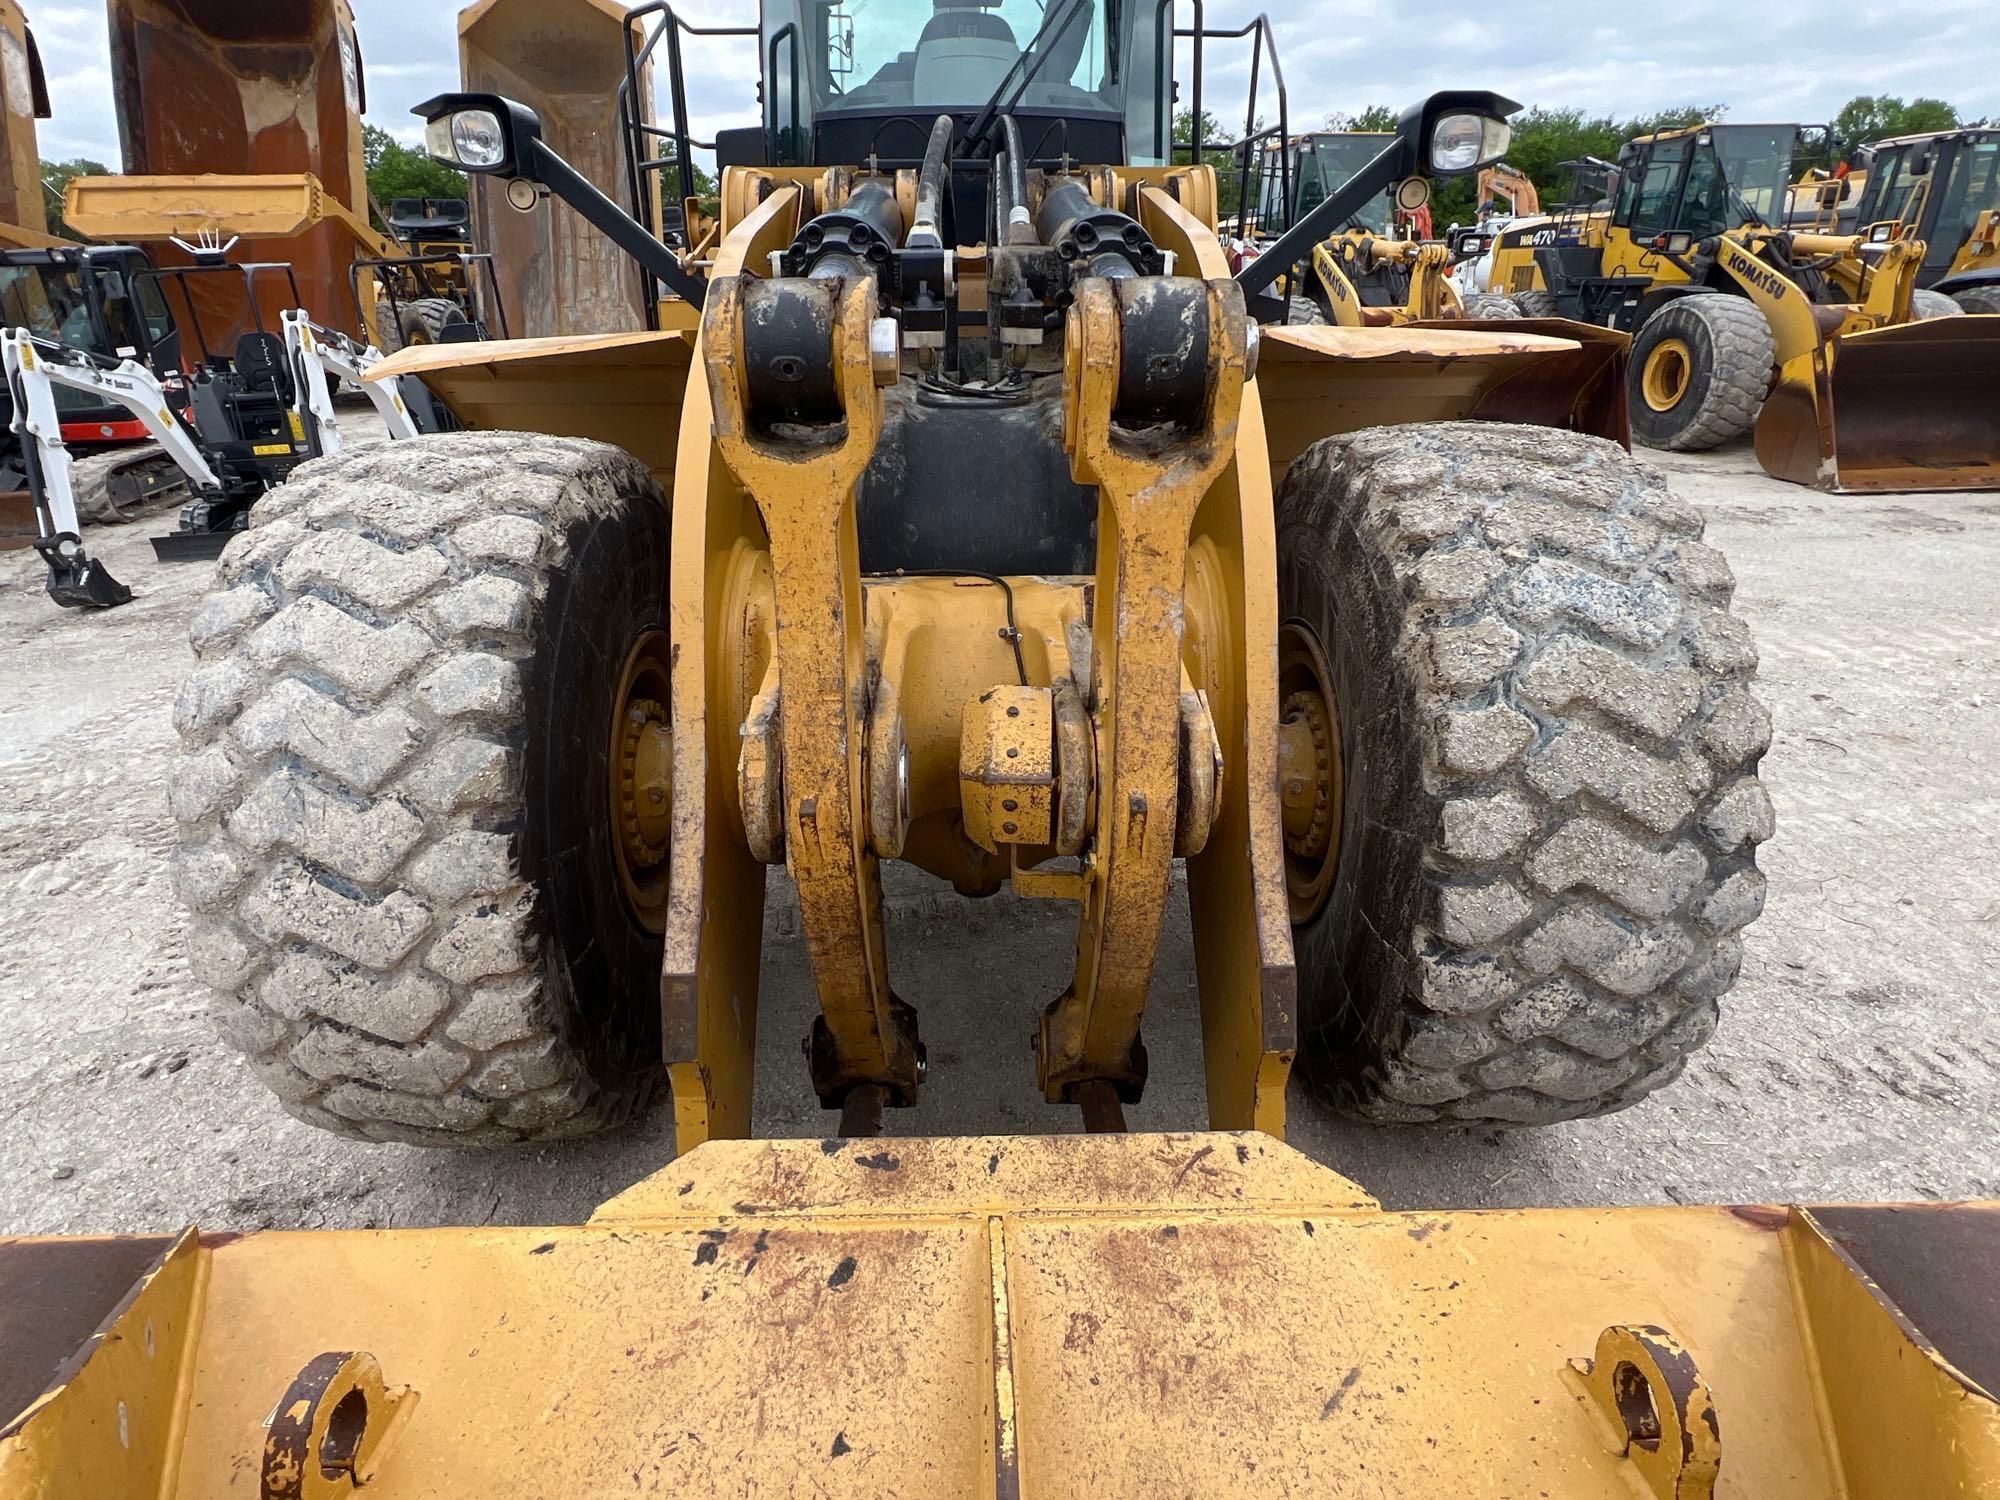 2014 CAT 980M RUBBER TIRED LOADER SN:CAT0980MCKRS00412 powered by Cat C13 diesel engine, equipped